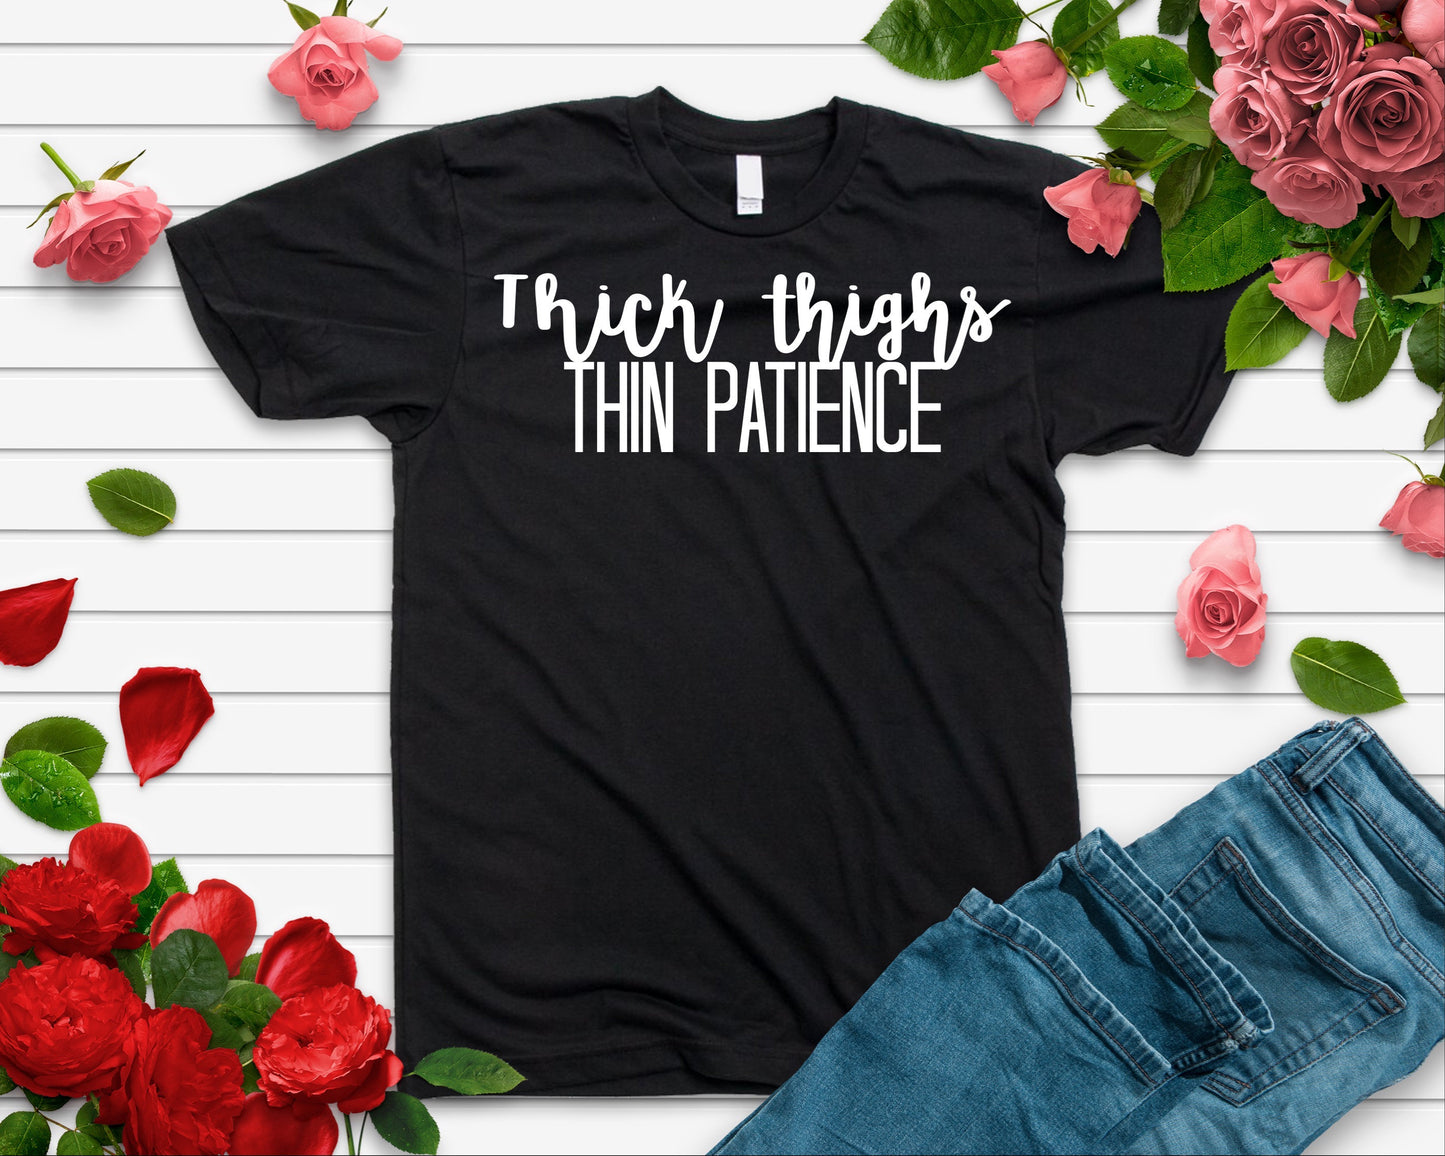 Thick thighs and thin patience, funny shirt, graphic tee, 2020 tee, thick girl love, body love tee, cute gift, christmas gift, Gift for her